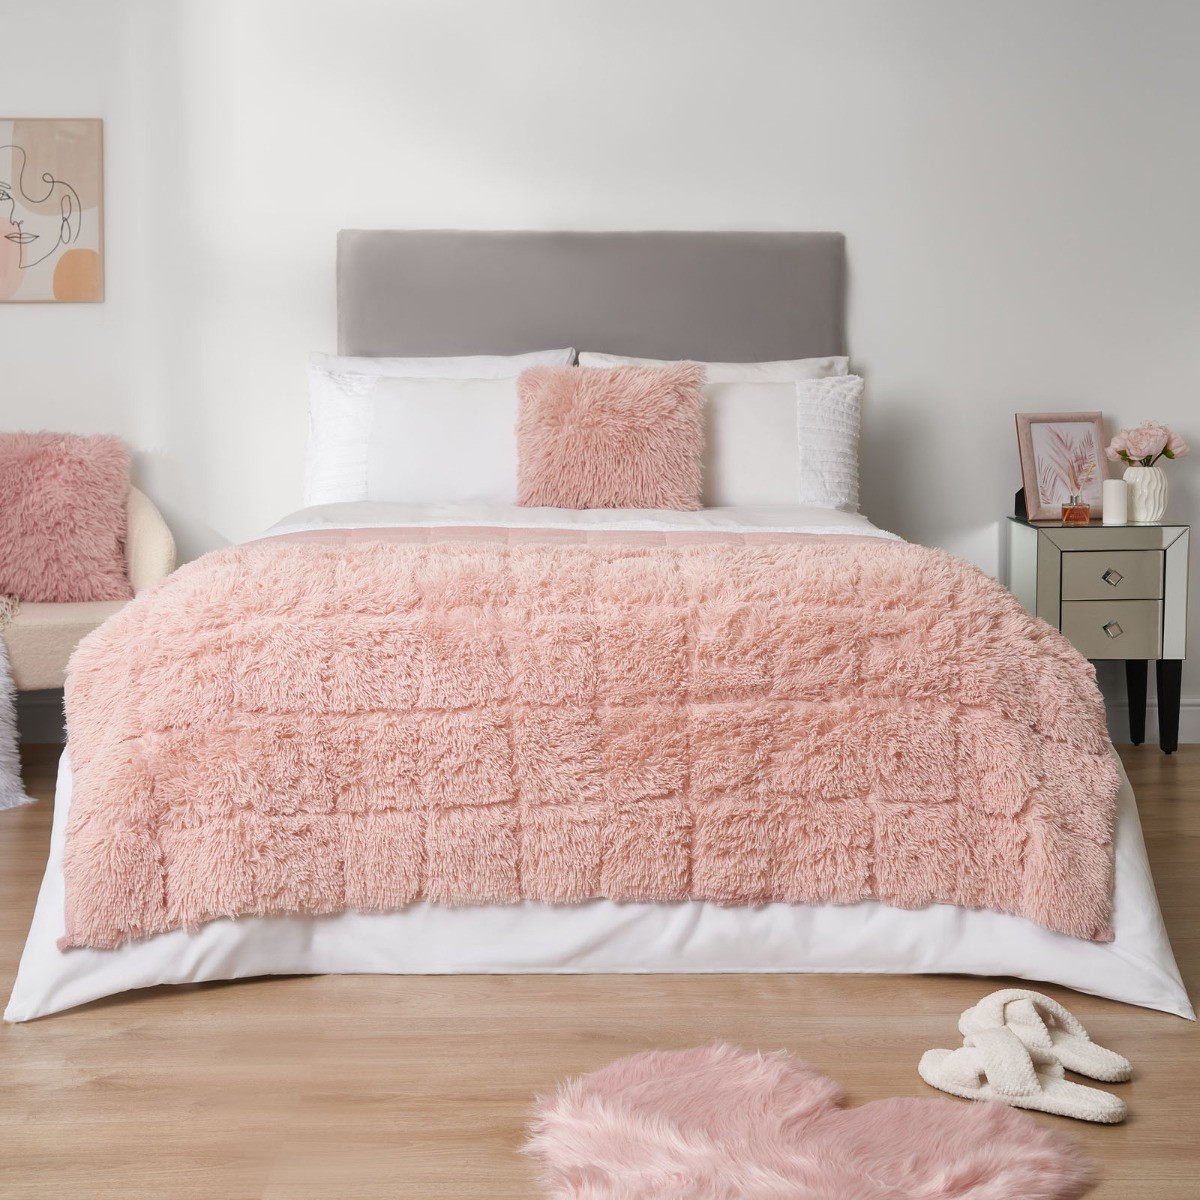 Sienna by OHS Fluffy Weighted Blanket, Blush - 50 x 70 inches - 13.2lb>